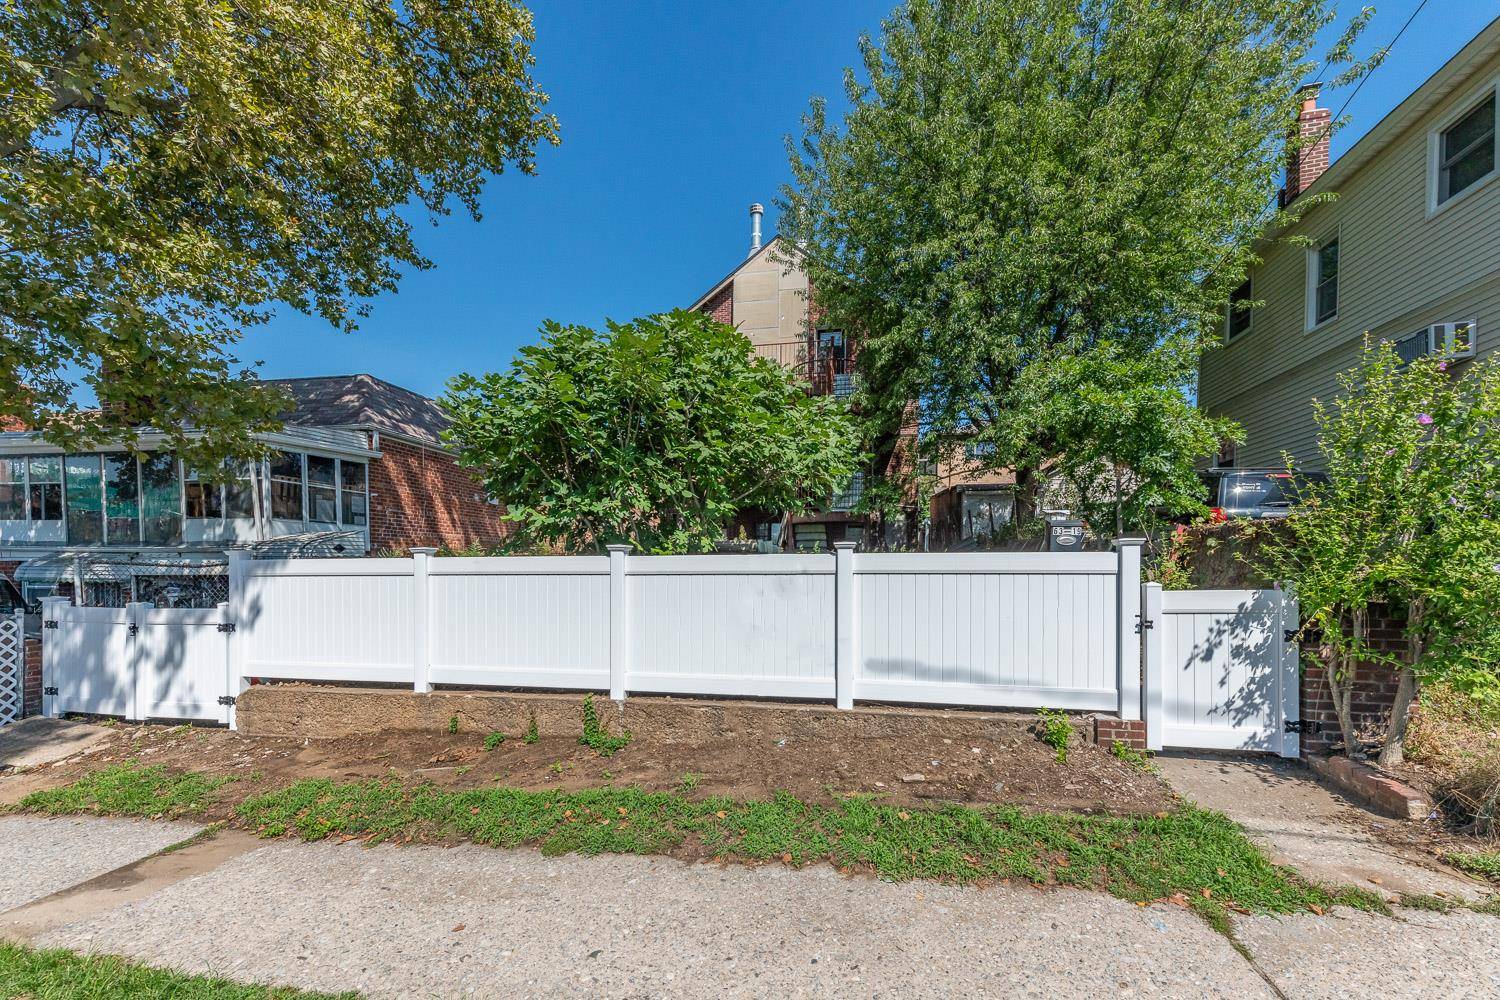 Come finish this incredible 2 family property in Maspeth that has been completely upgraded and needs only finishing touches to be called the most impressive home in the entire neighborhood.